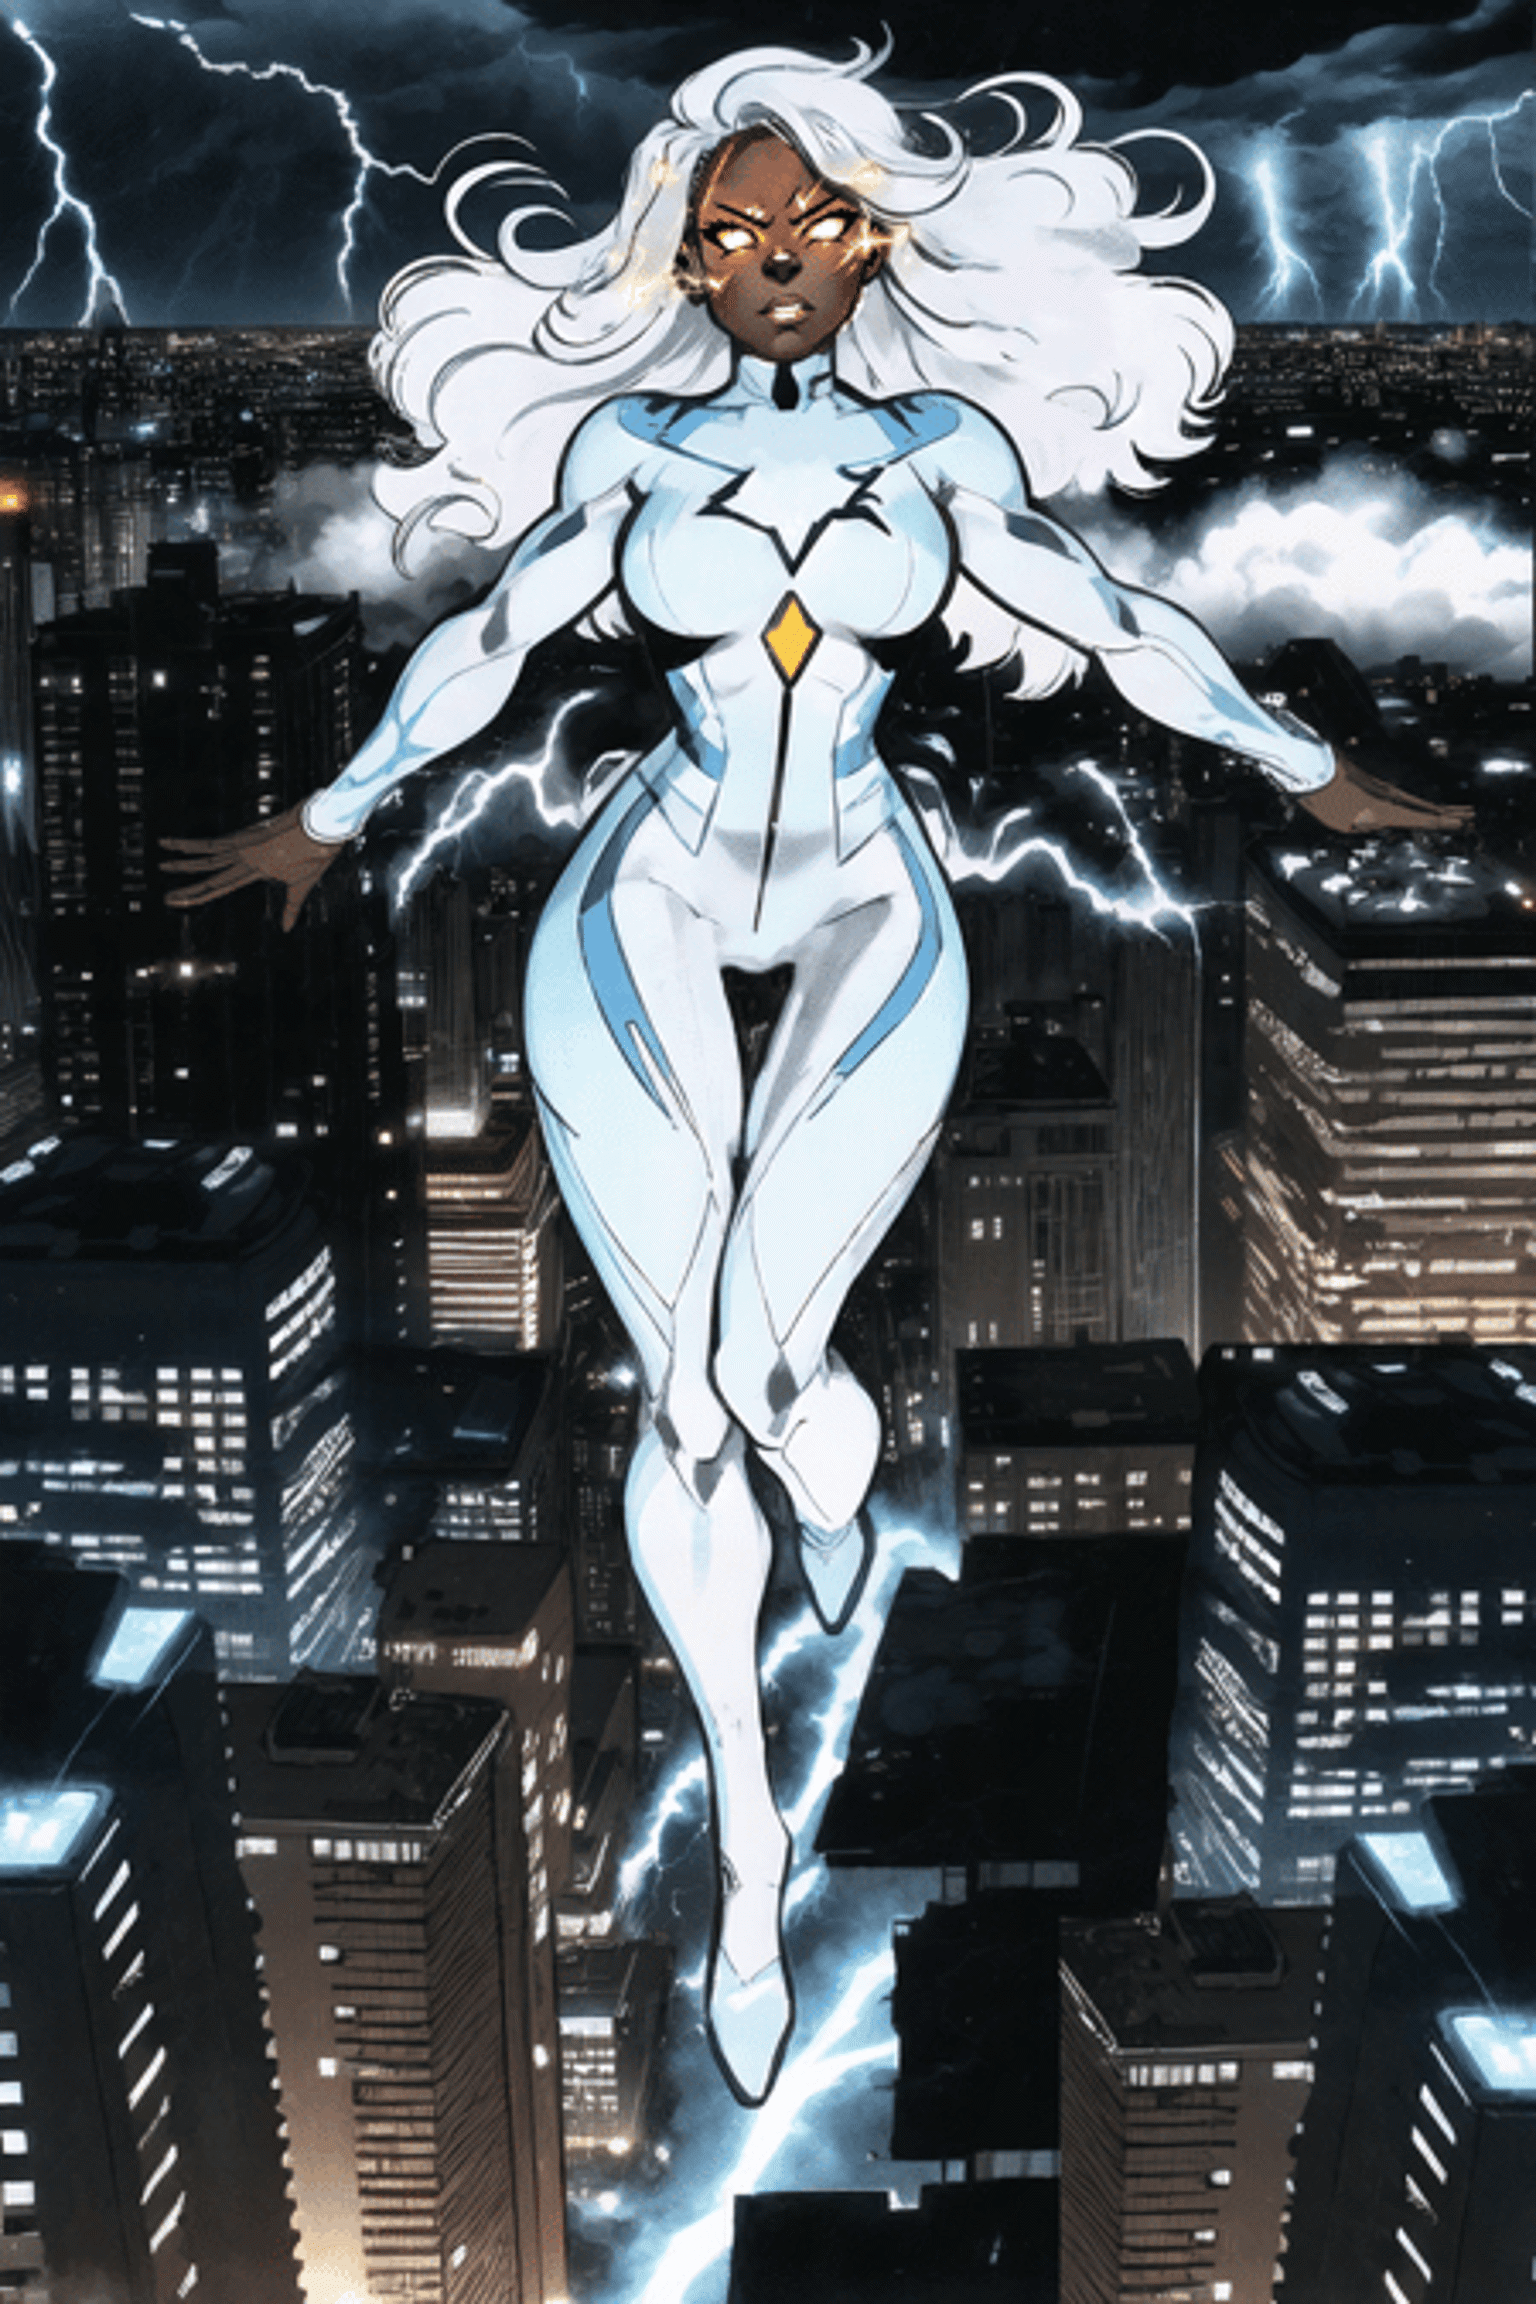 Anime-style comic book illustration of a woman in a white costume with blue accents, flying over a cityscape with her arms outstretched.